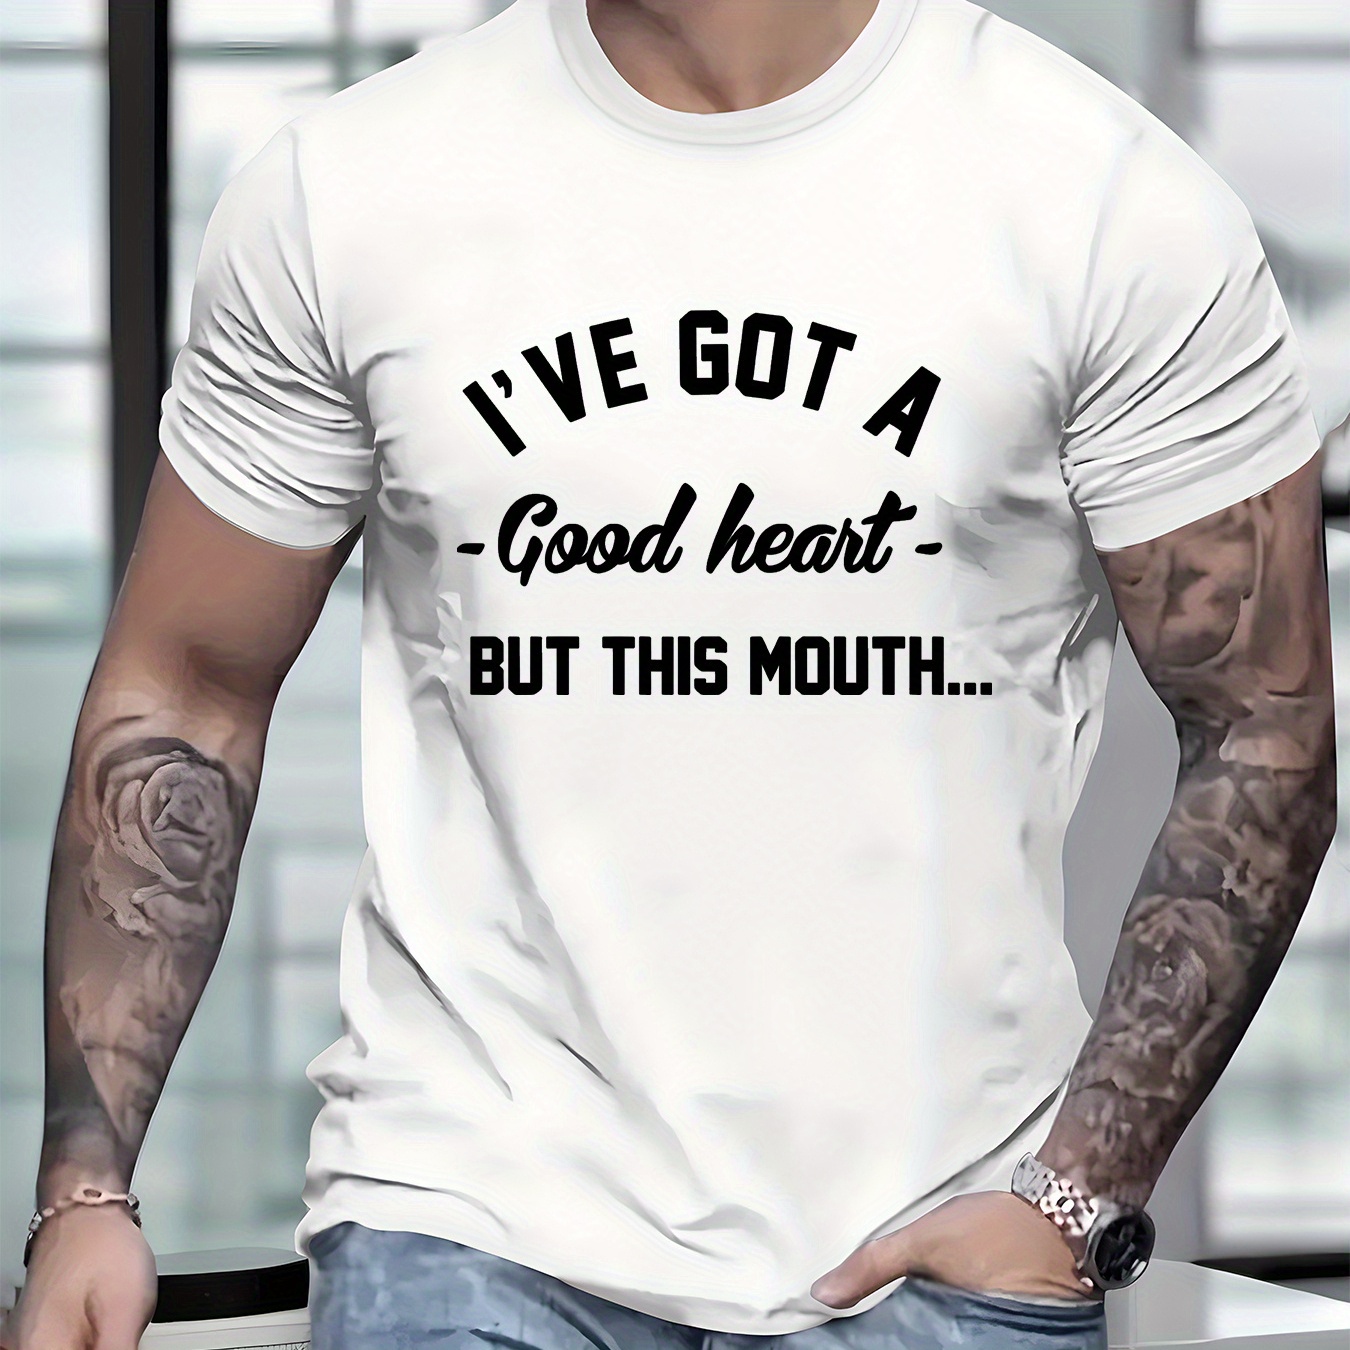 

1 Pc, 100% Cotton T-shirt, Men's Letters Graphic Print T-shirt, Summer Trendy Athletic Short Sleeve Tees For Males, Stylish Casual Style